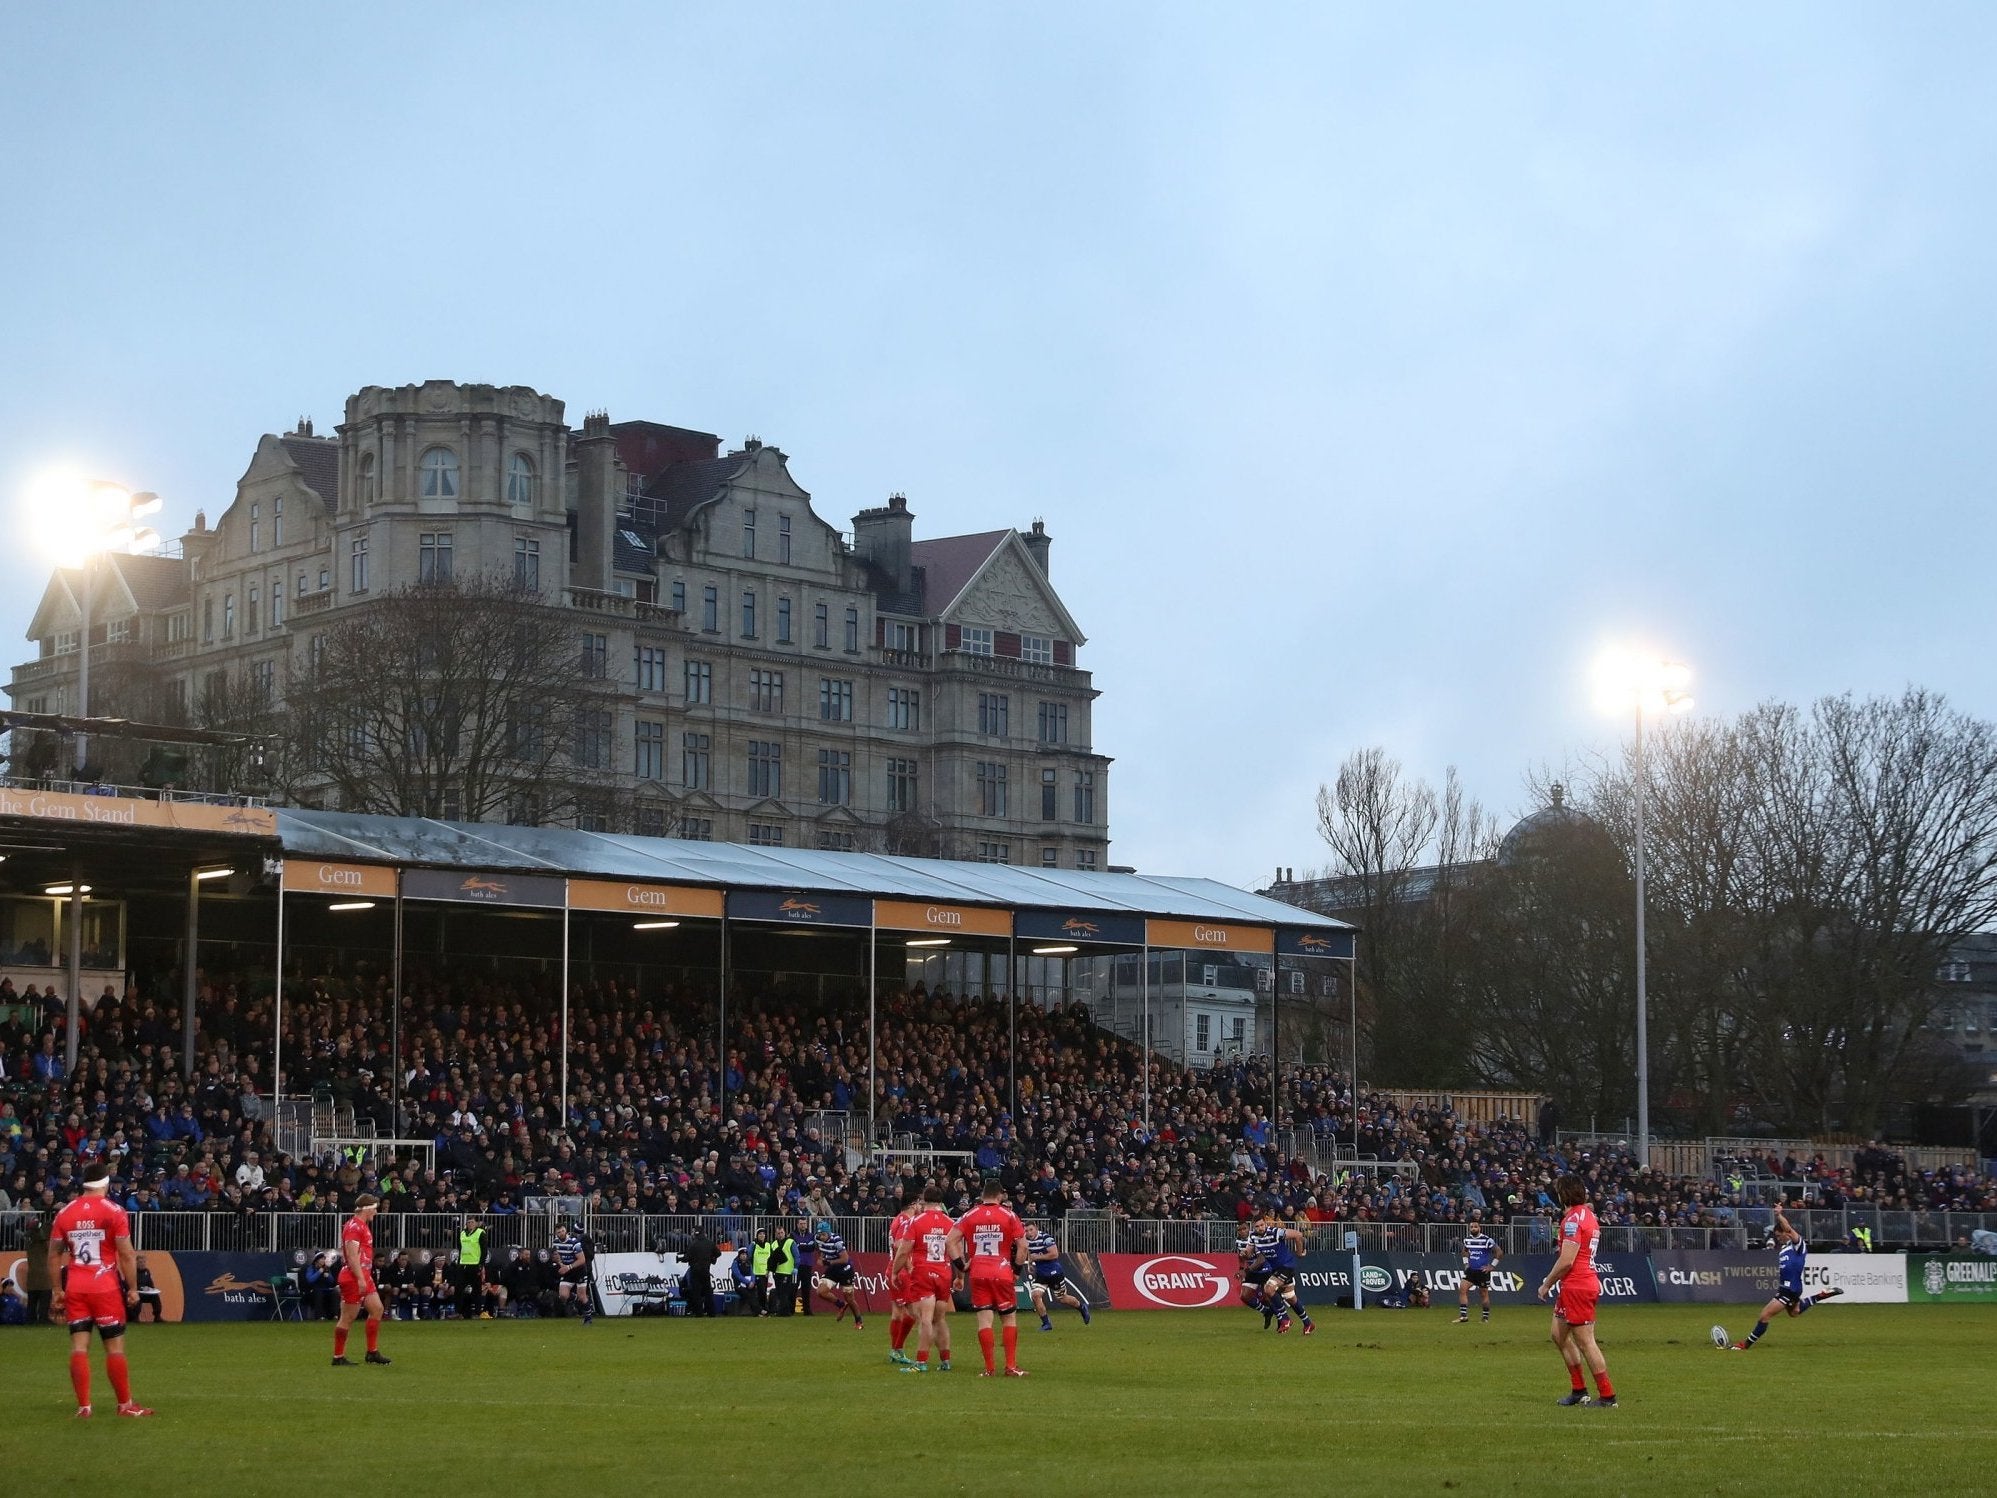 Bath released promising plans to redevelop the Recreation Ground this week